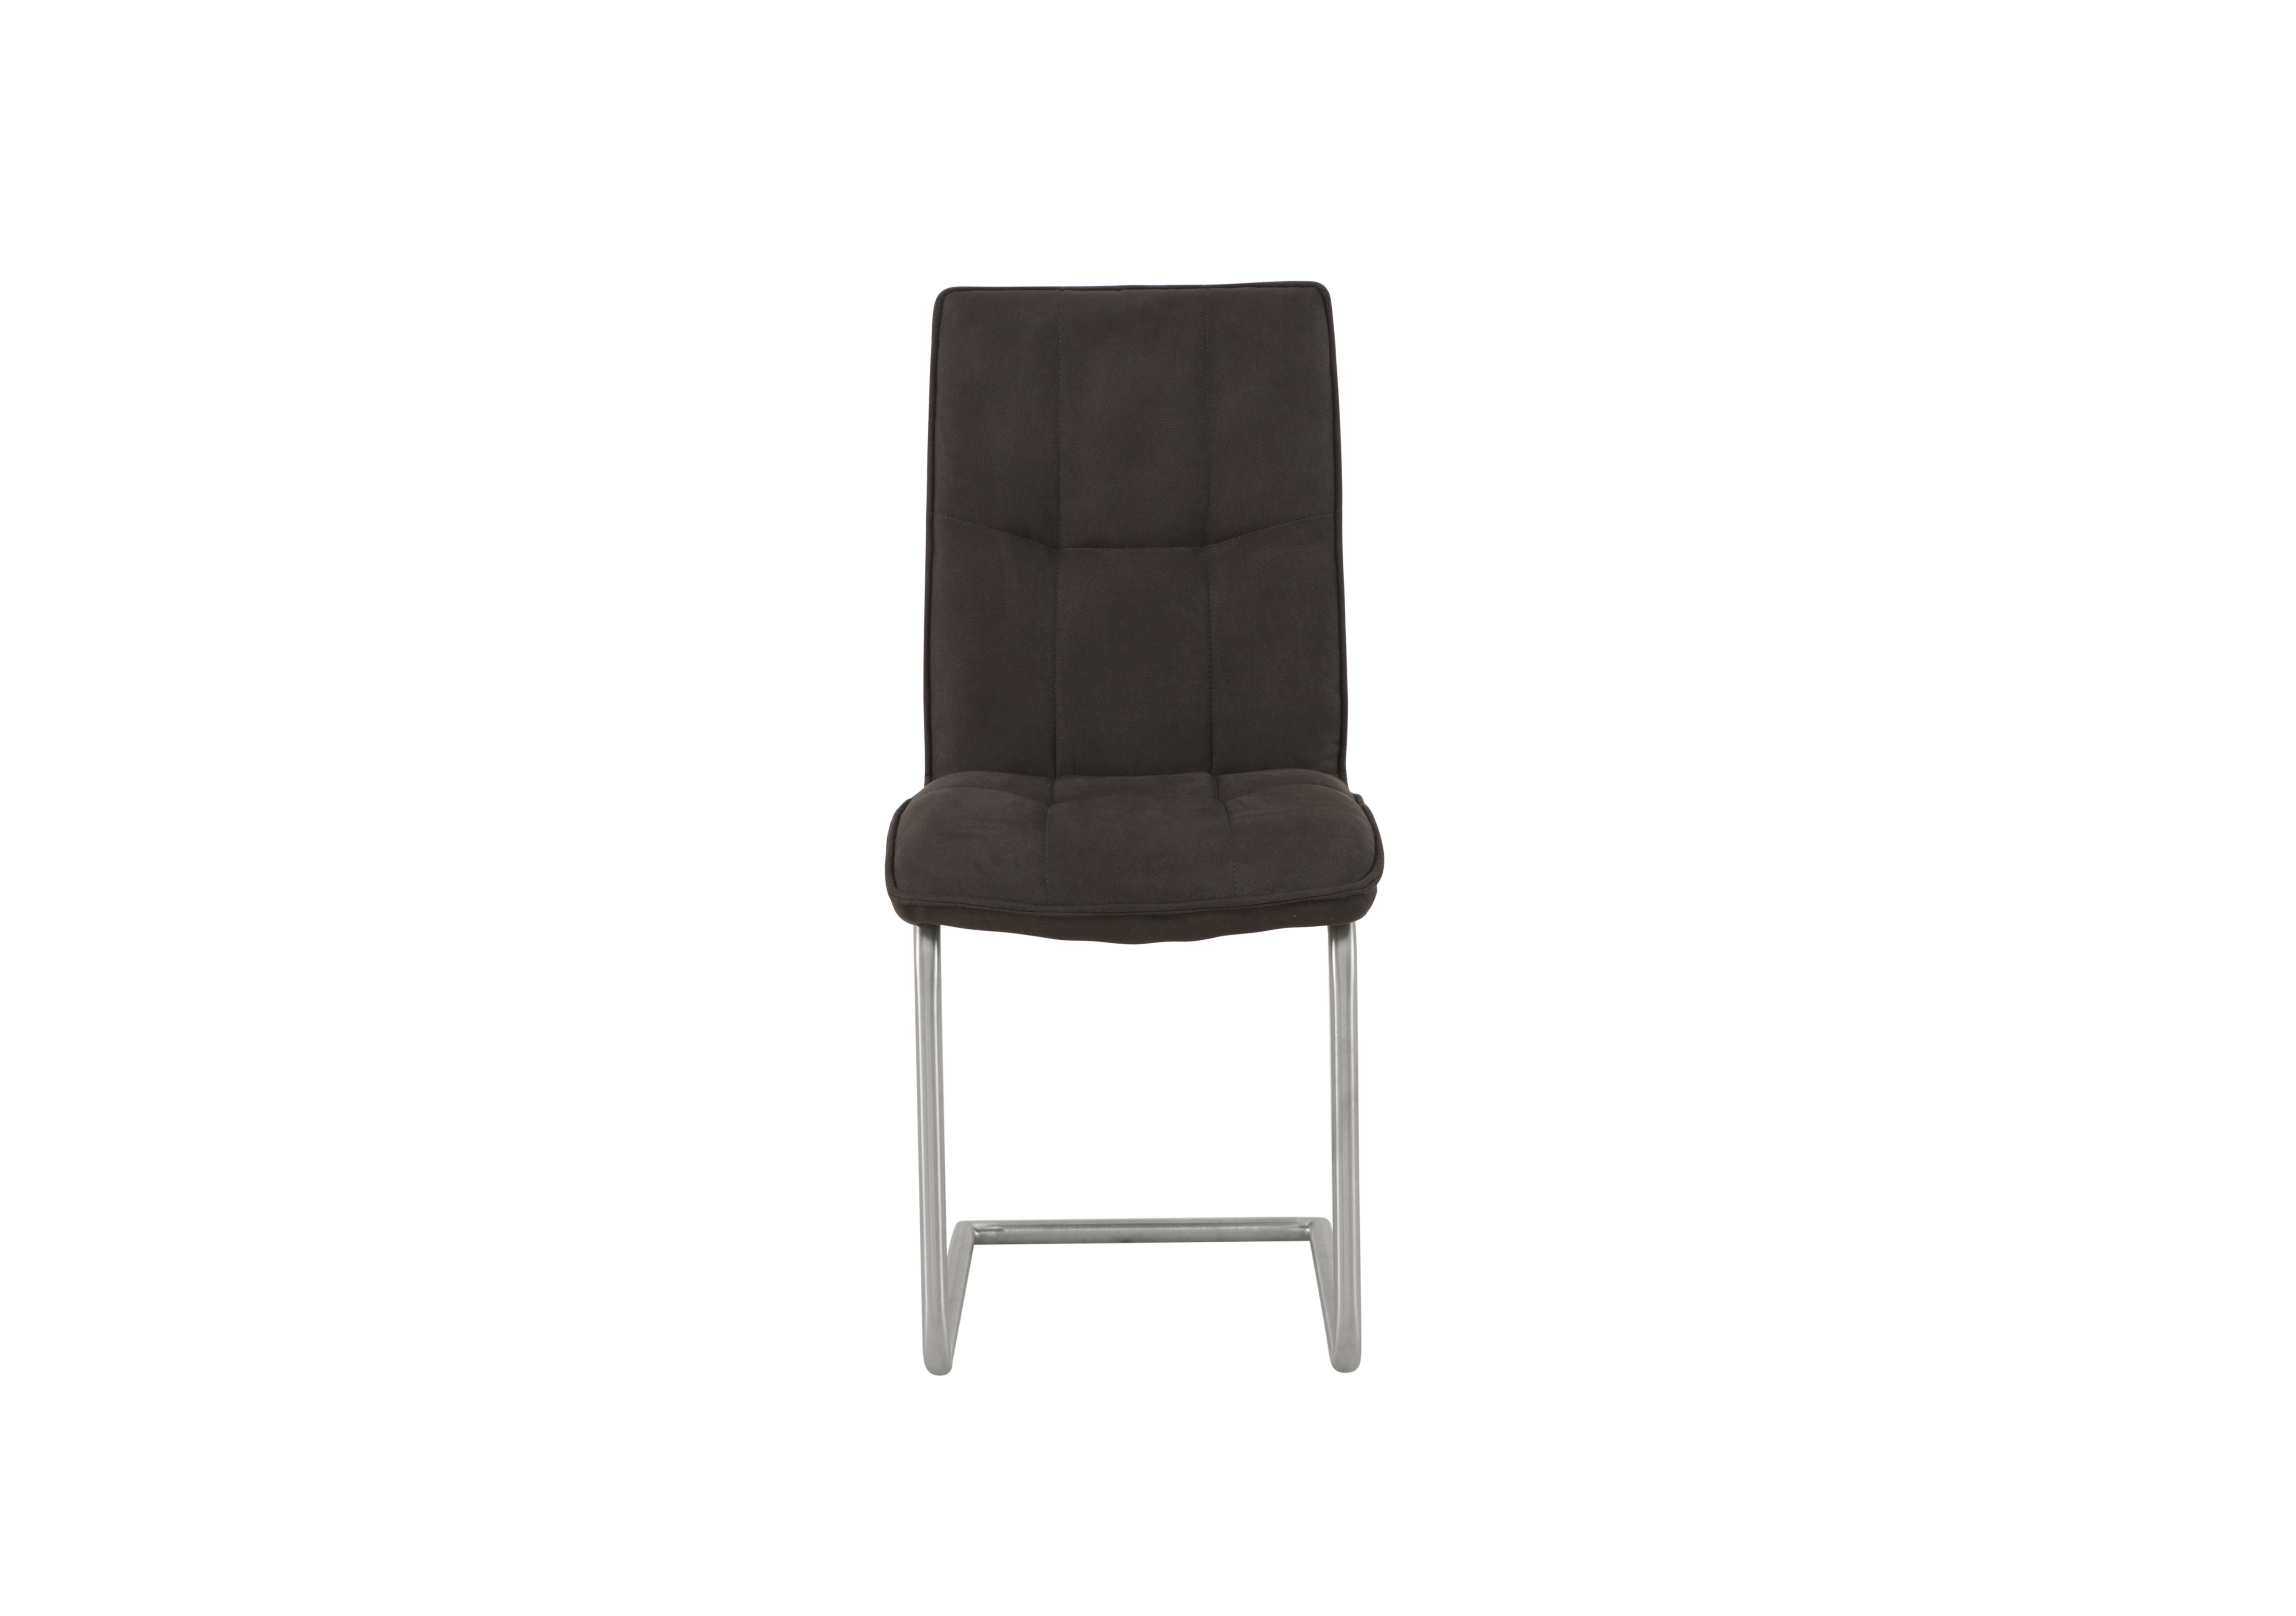 Fusion Cantilever Dining Chair in Charcoal on Furniture Village